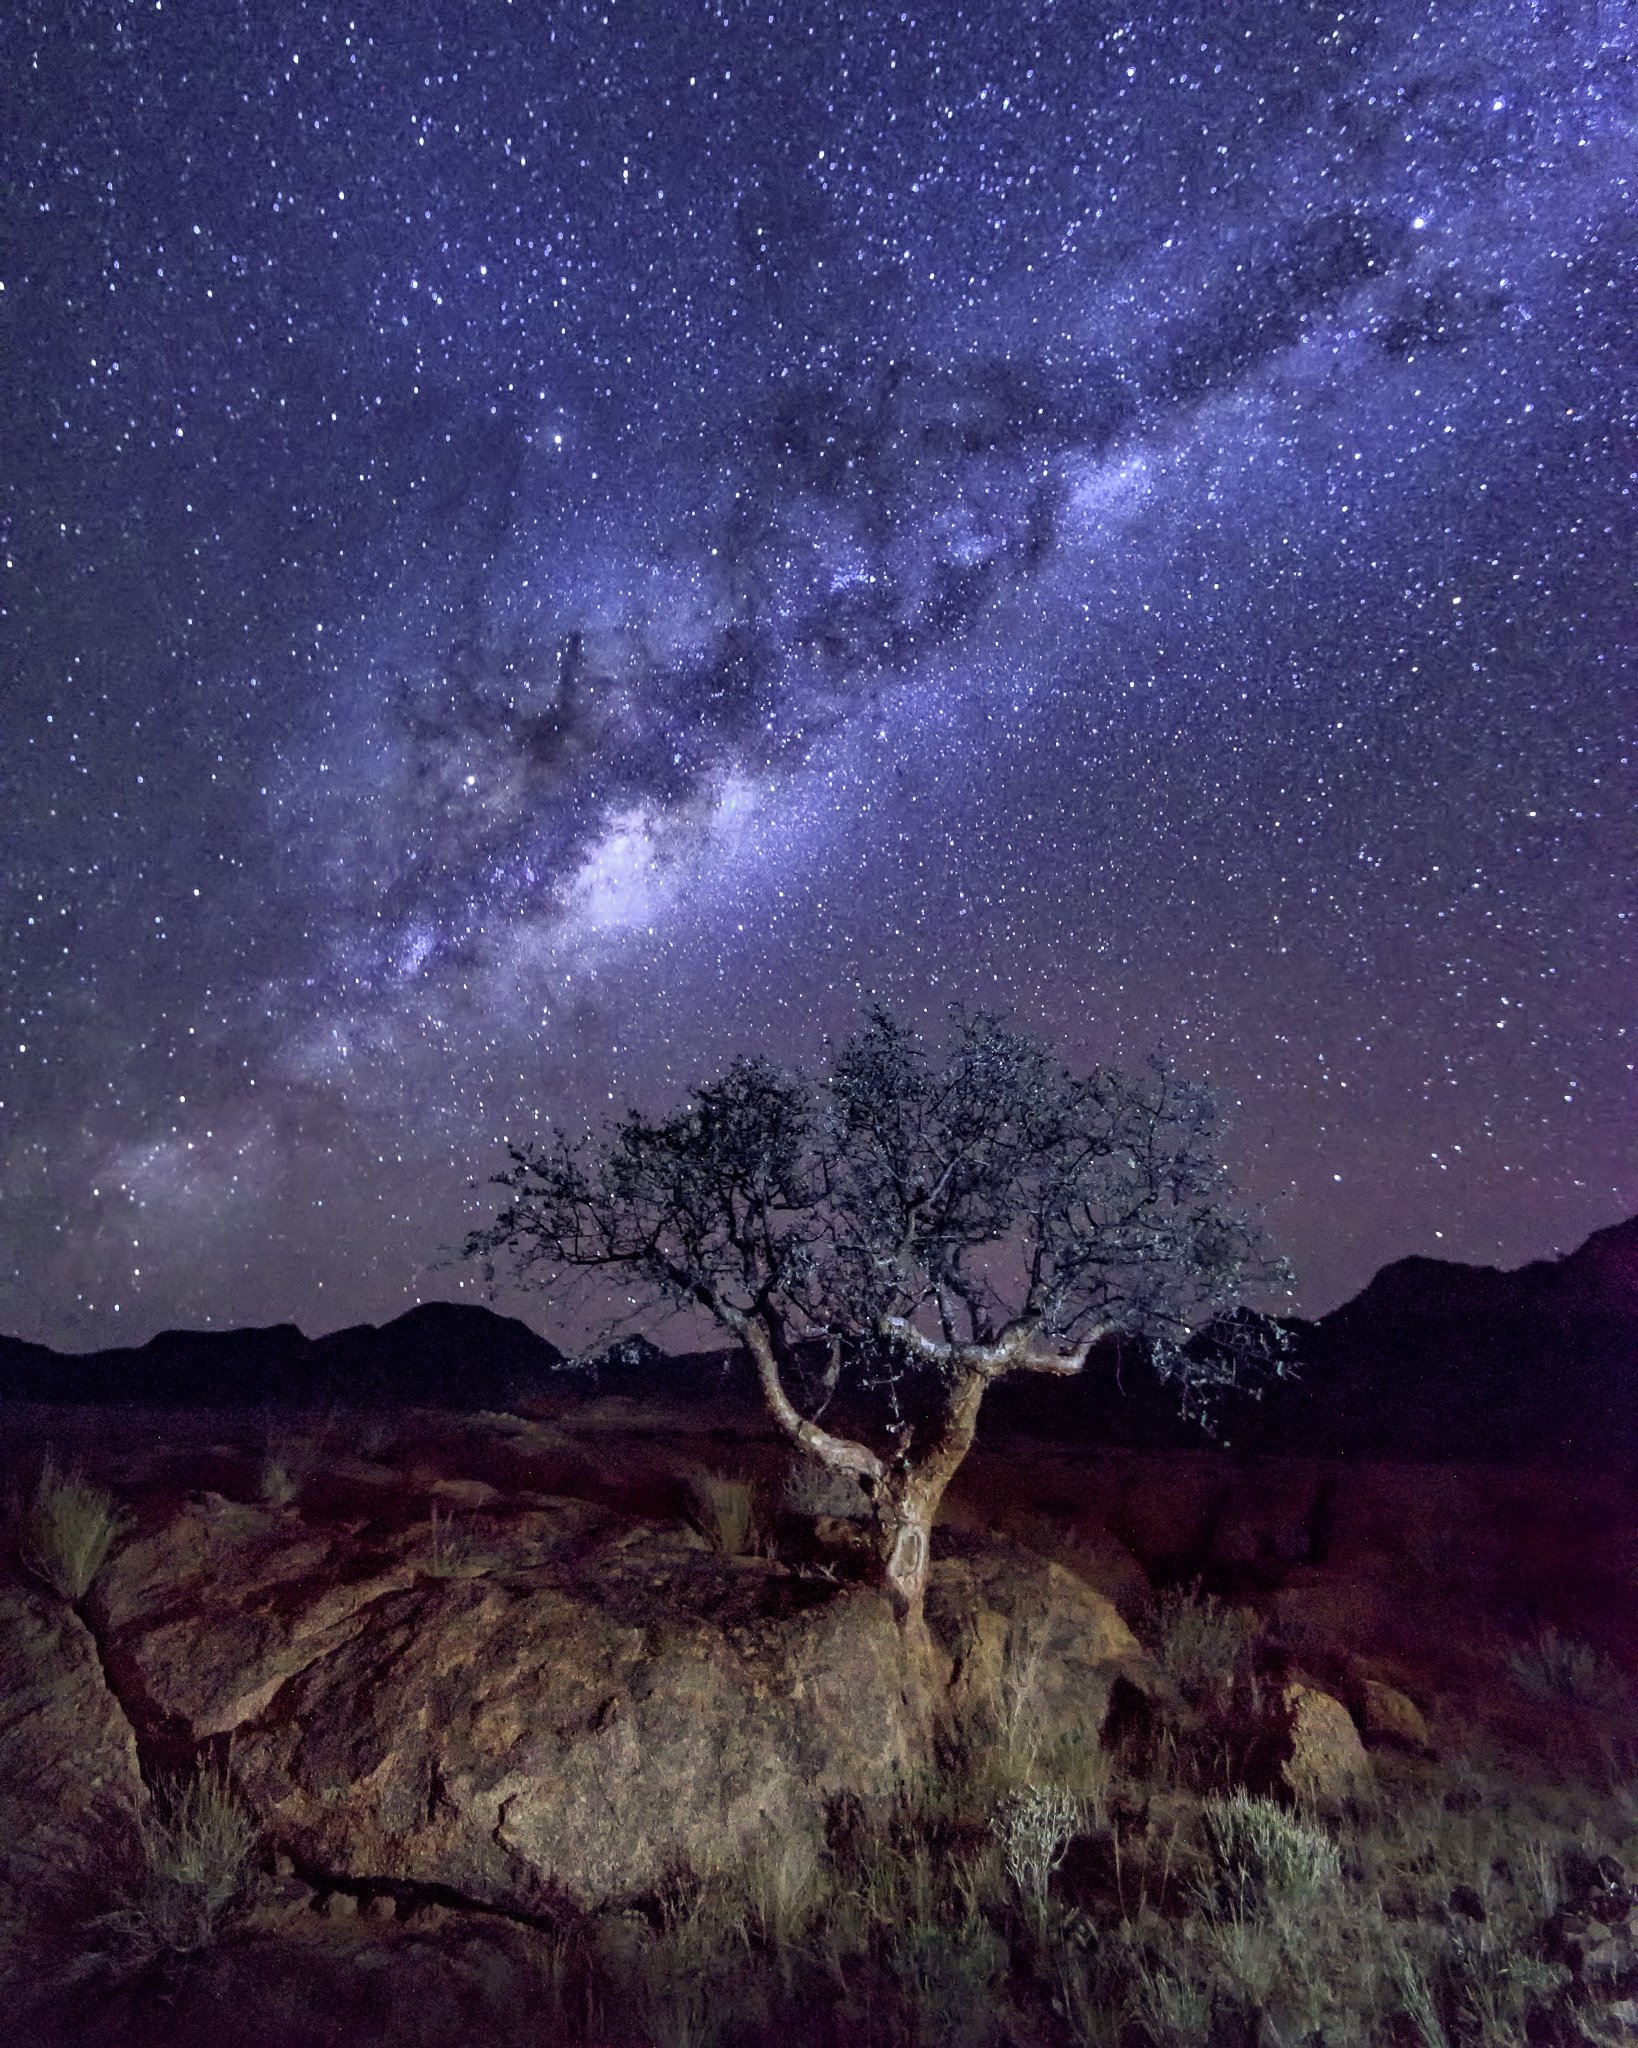 Africa, african, astronomy, astrophotography, background, beauty, blue, constellations, dark, darkness, desert, ethereal, evening, field, galaxy, glow, granite, hemisphere, hill, illuminated, infinity, landscape, milky, namib, namibia, natural, nature, ne, Andrey Omelyanchuk